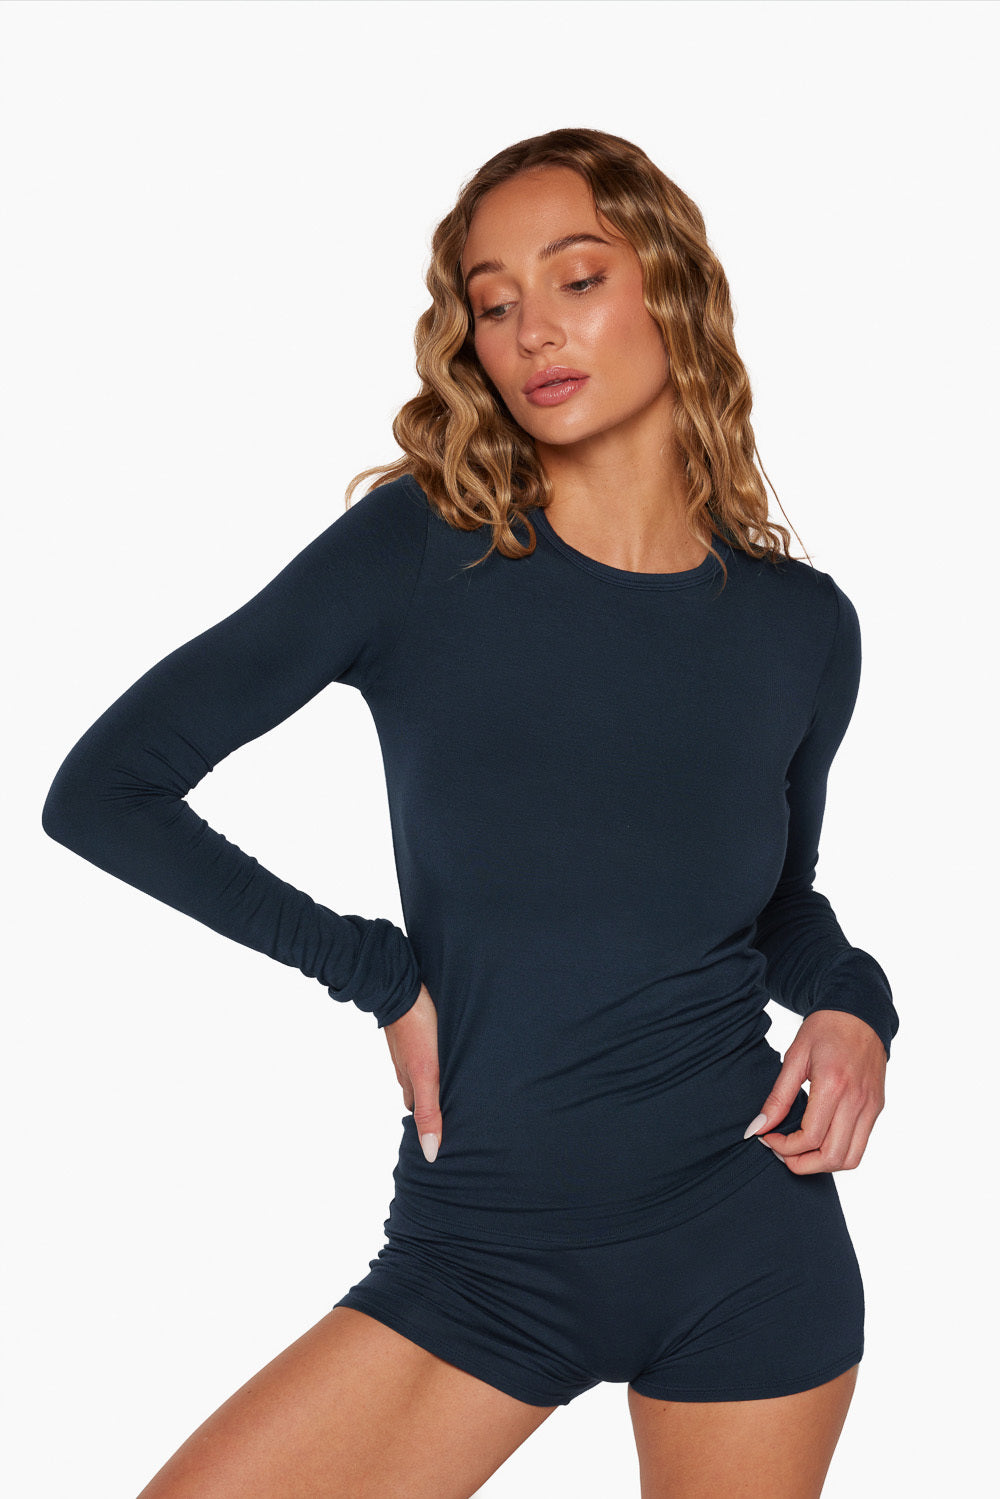 SLEEP JERSEY FITTED LONG SLEEVE - OXFORD